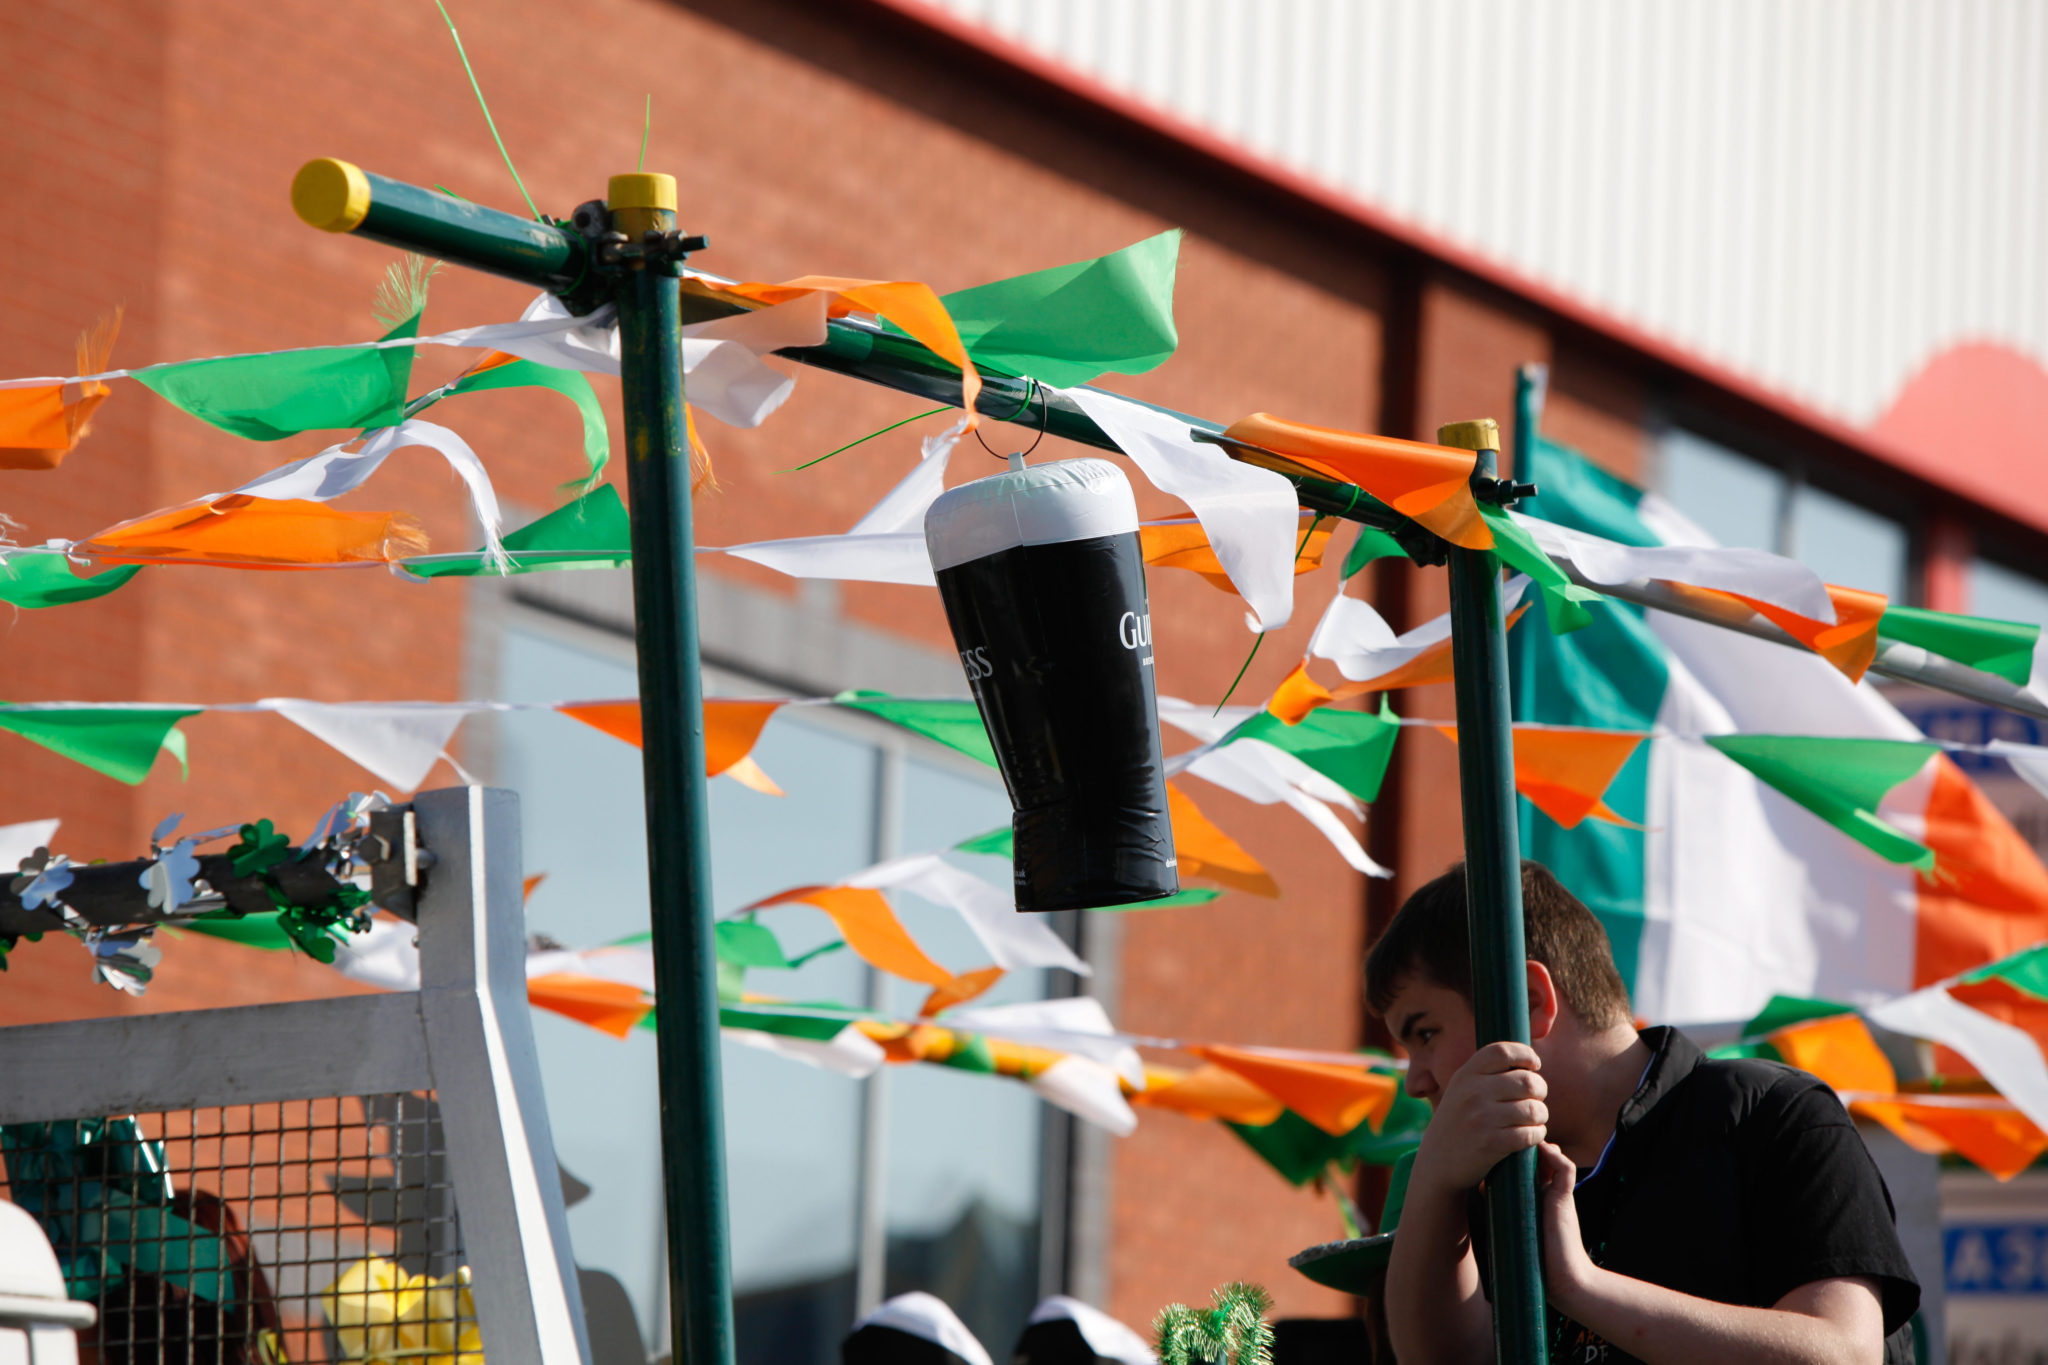 Decorations are seen ahead of a St Patrick's Day parade in Birmingham, UK in March 2012.